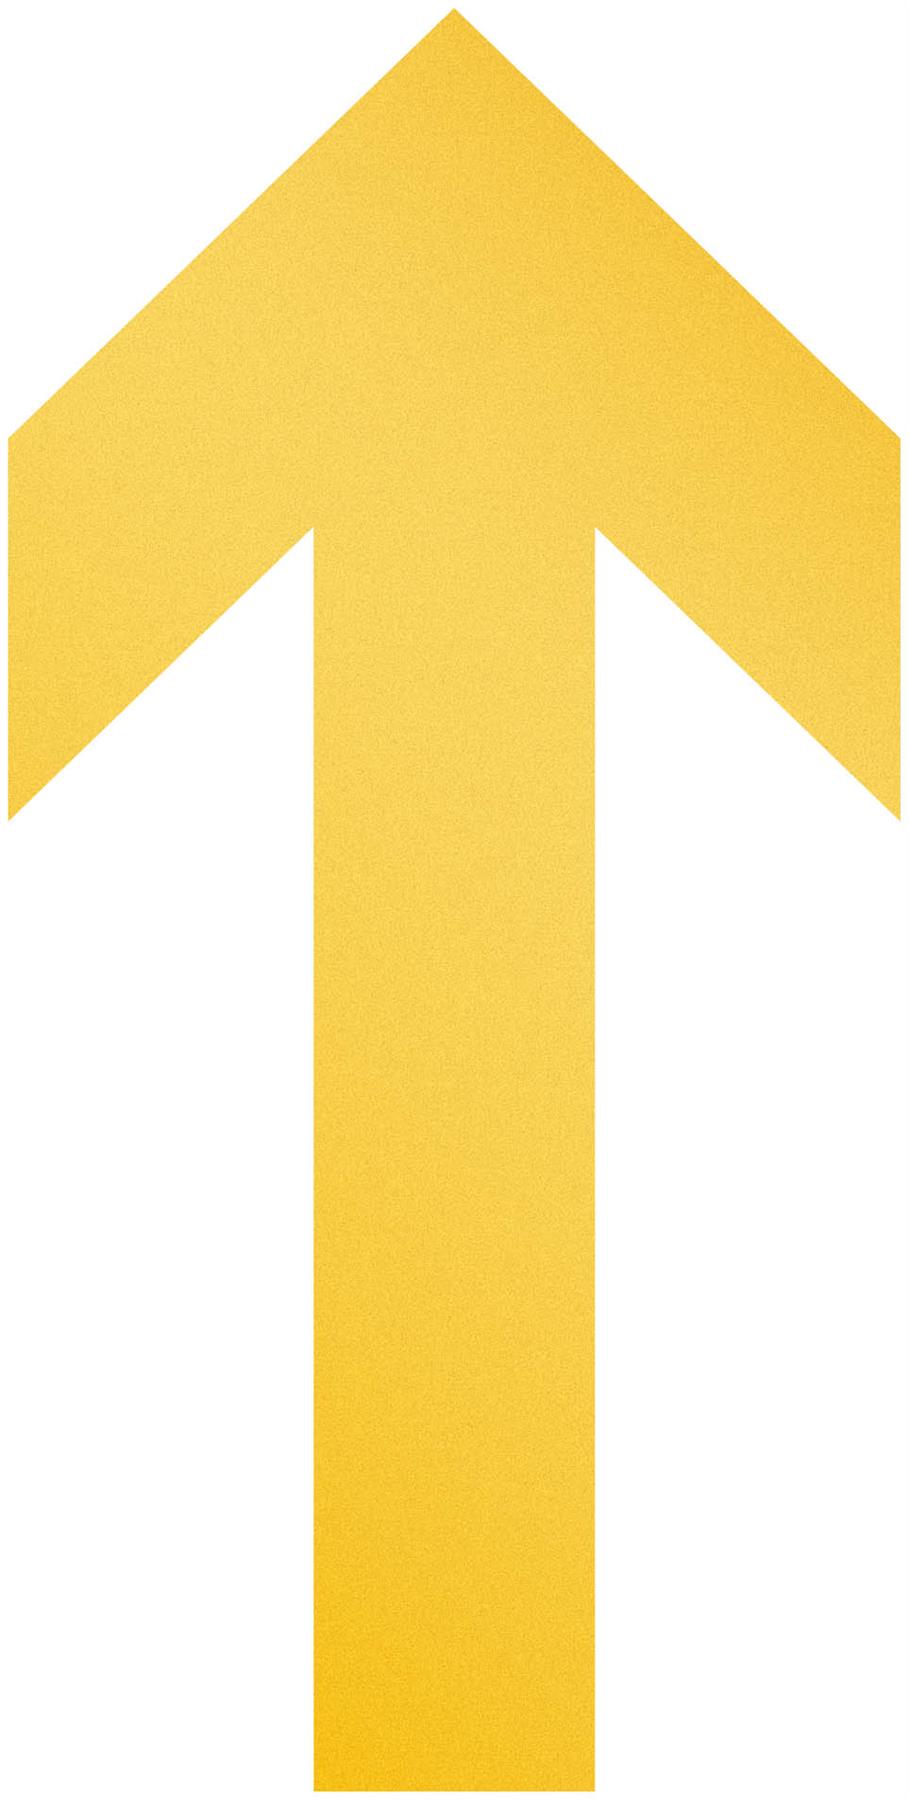 Durable Adhesive Safety Arrow Sign Removable Floor Stickers | 10 Pack | Yellow